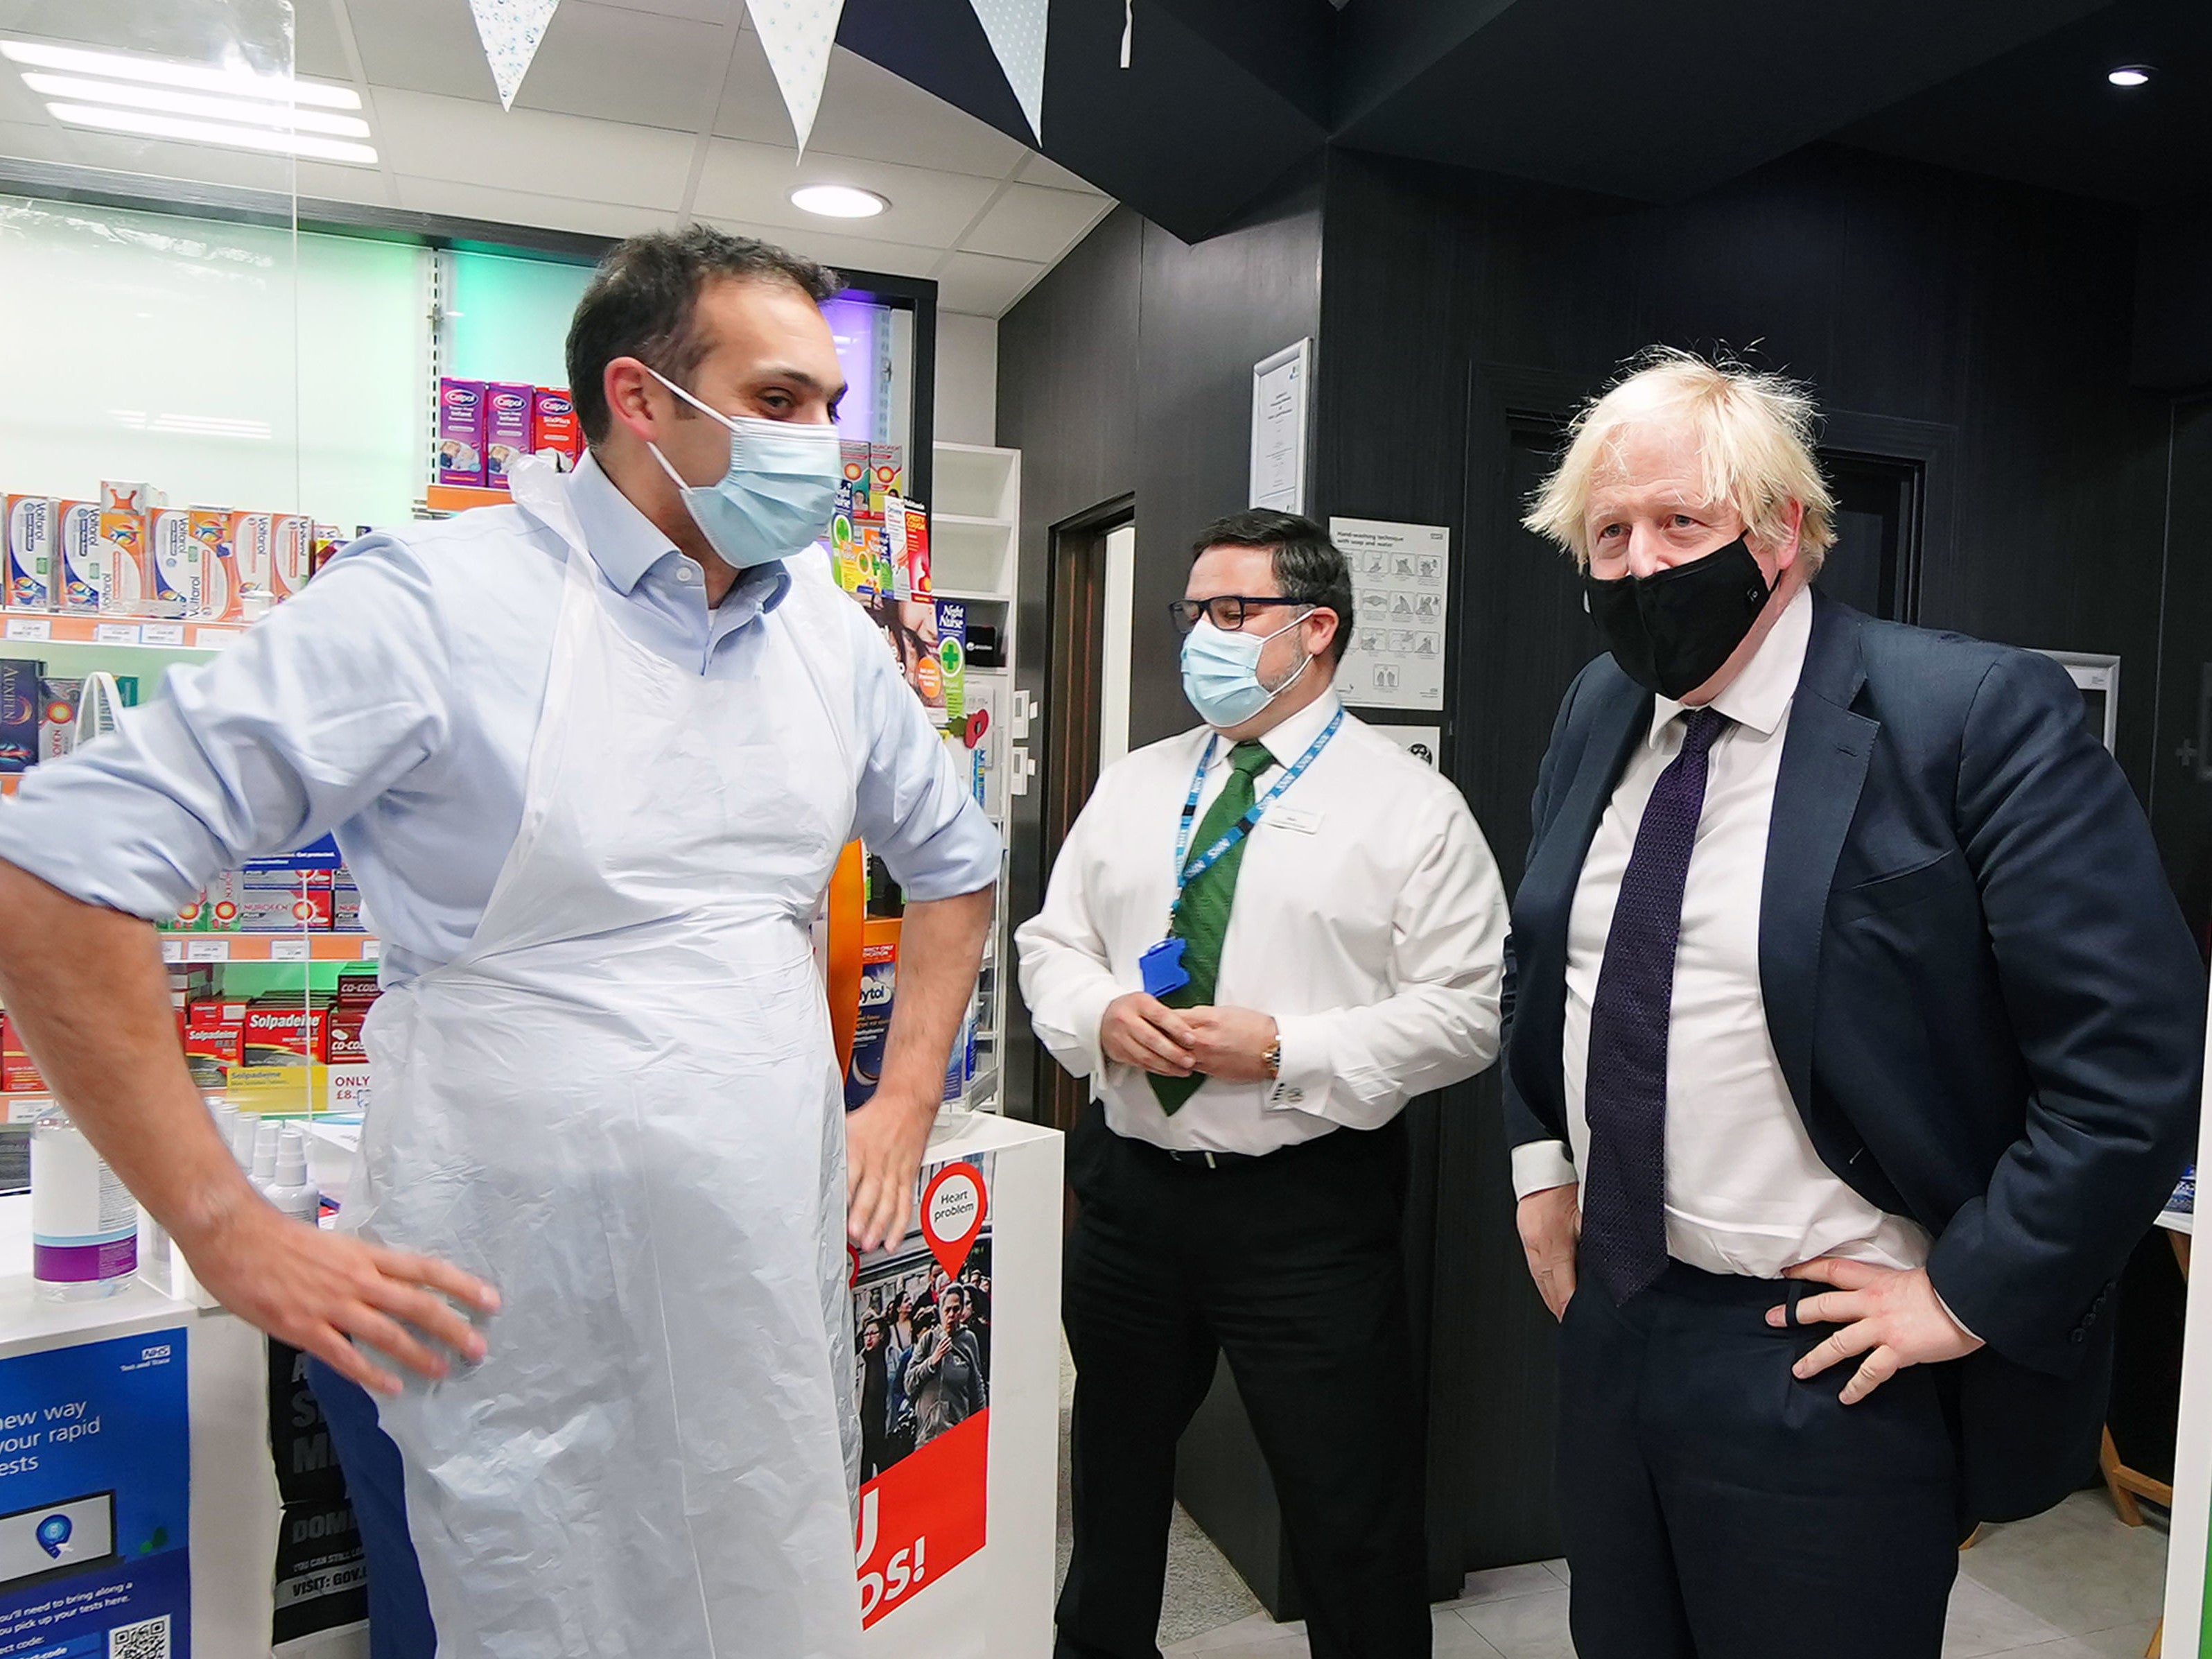 Boris Johnson meets staff during a visit to a pharmacy in North Shropshire ahead of the upcoming by-election